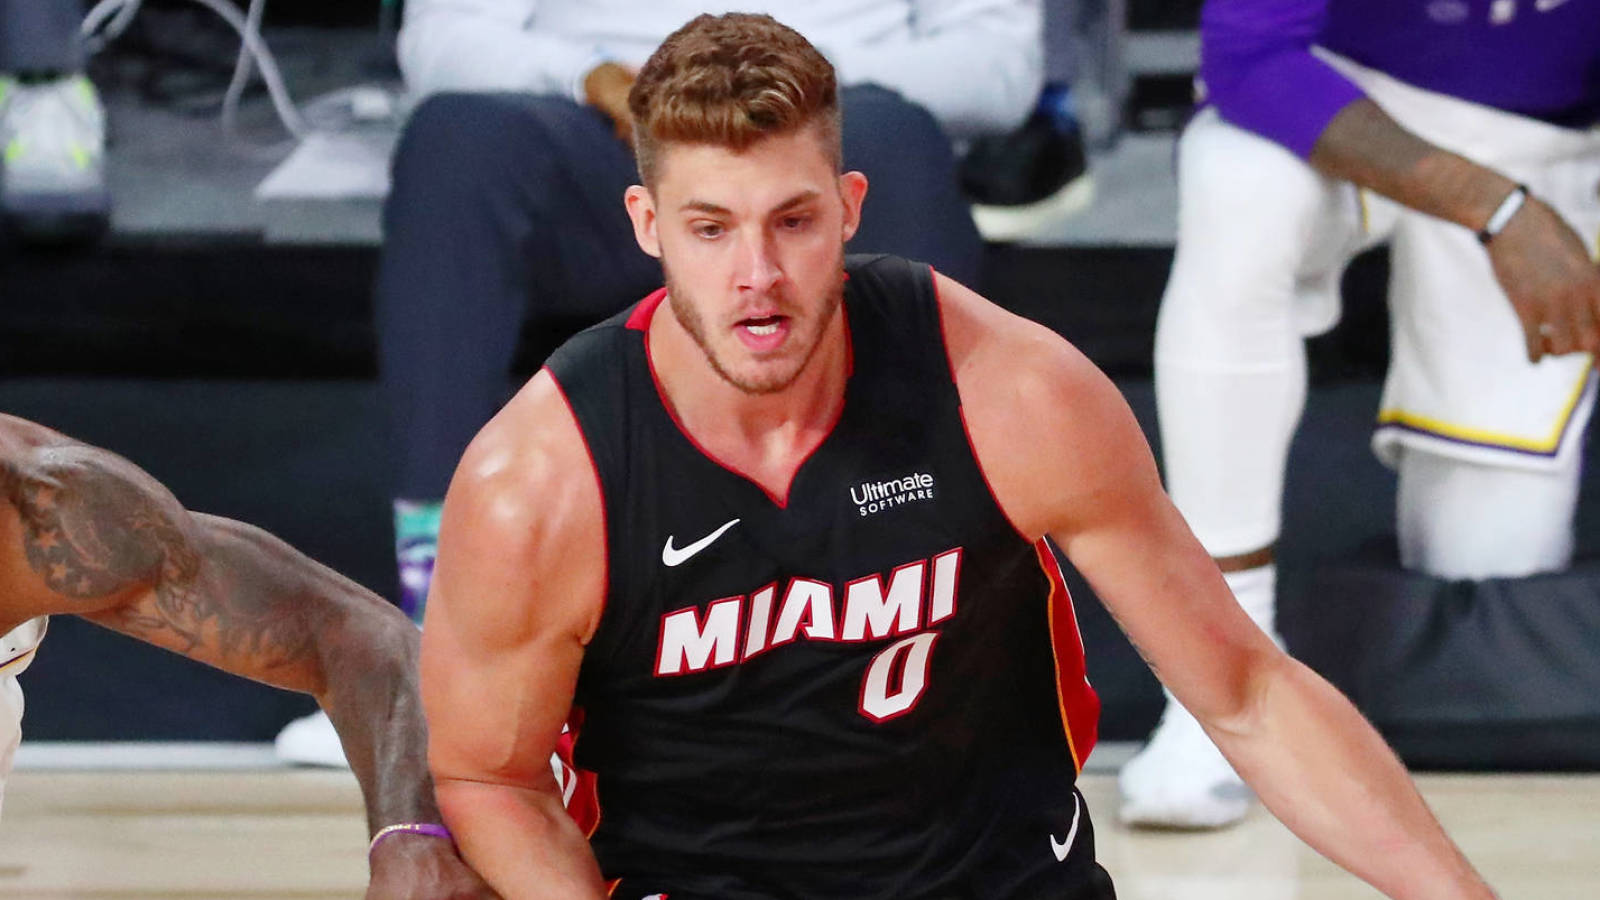 Heat's Meyers Leonard suspended for a week, fined $50,000 for anti-Semitic slur